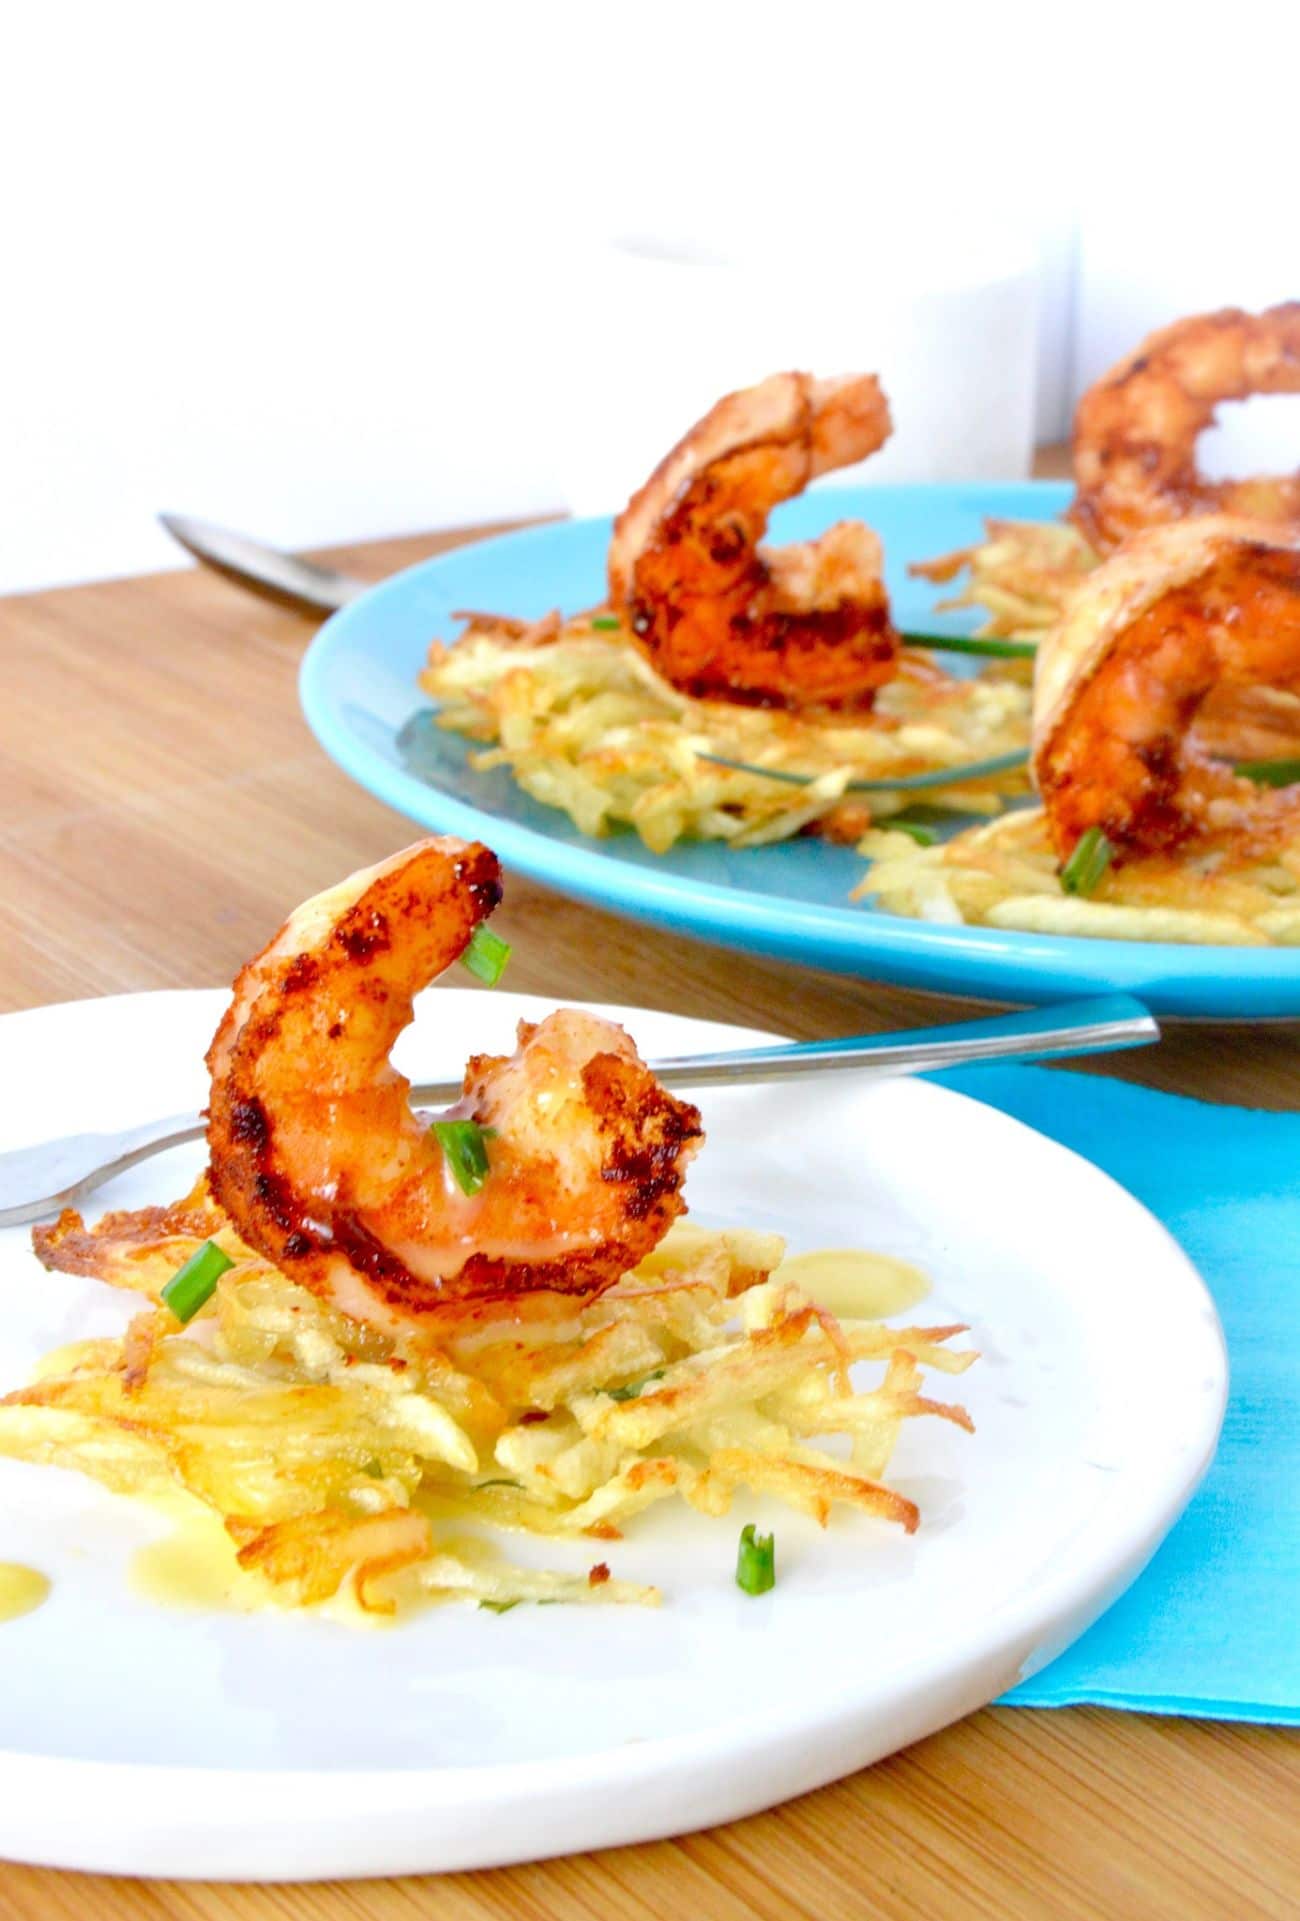 Smoky succulent shrimp rolled in spices that caramelize placed over a crispy potato nest then drizzled in a buttery béarnaise sauce hit on all of your taste buds…. This recipe for Smoky Shrimp on potato nests is a fantastic appetizer that looks great and tastes even better.